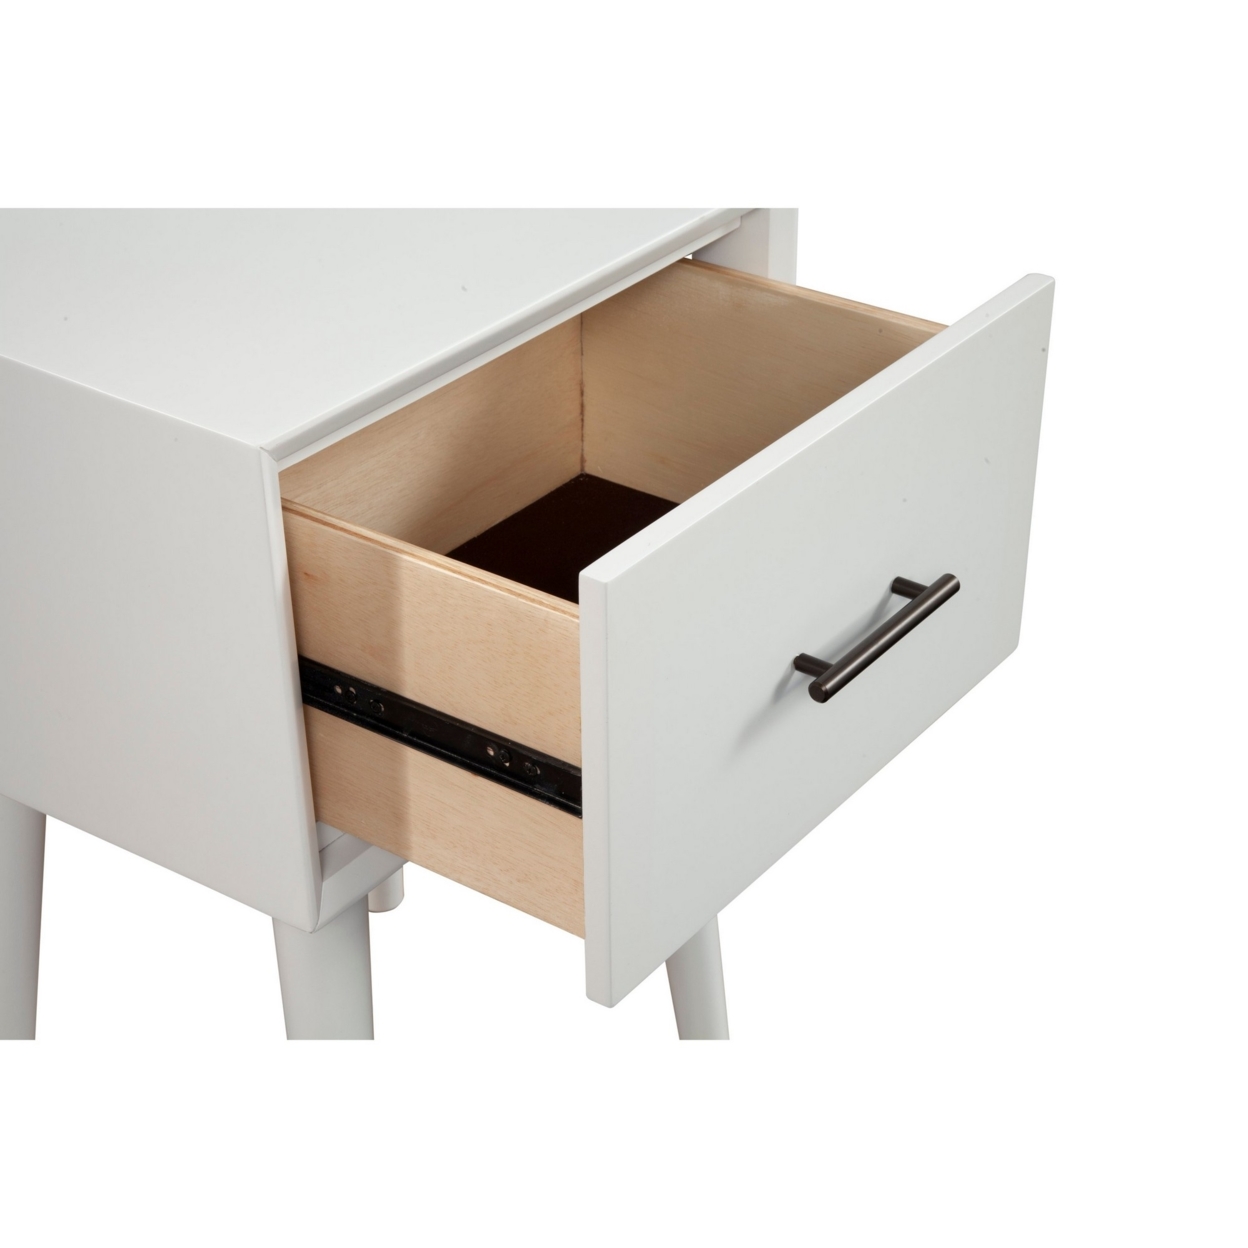 End Table With 1 Drawer And Angled Legs, White- Saltoro Sherpi